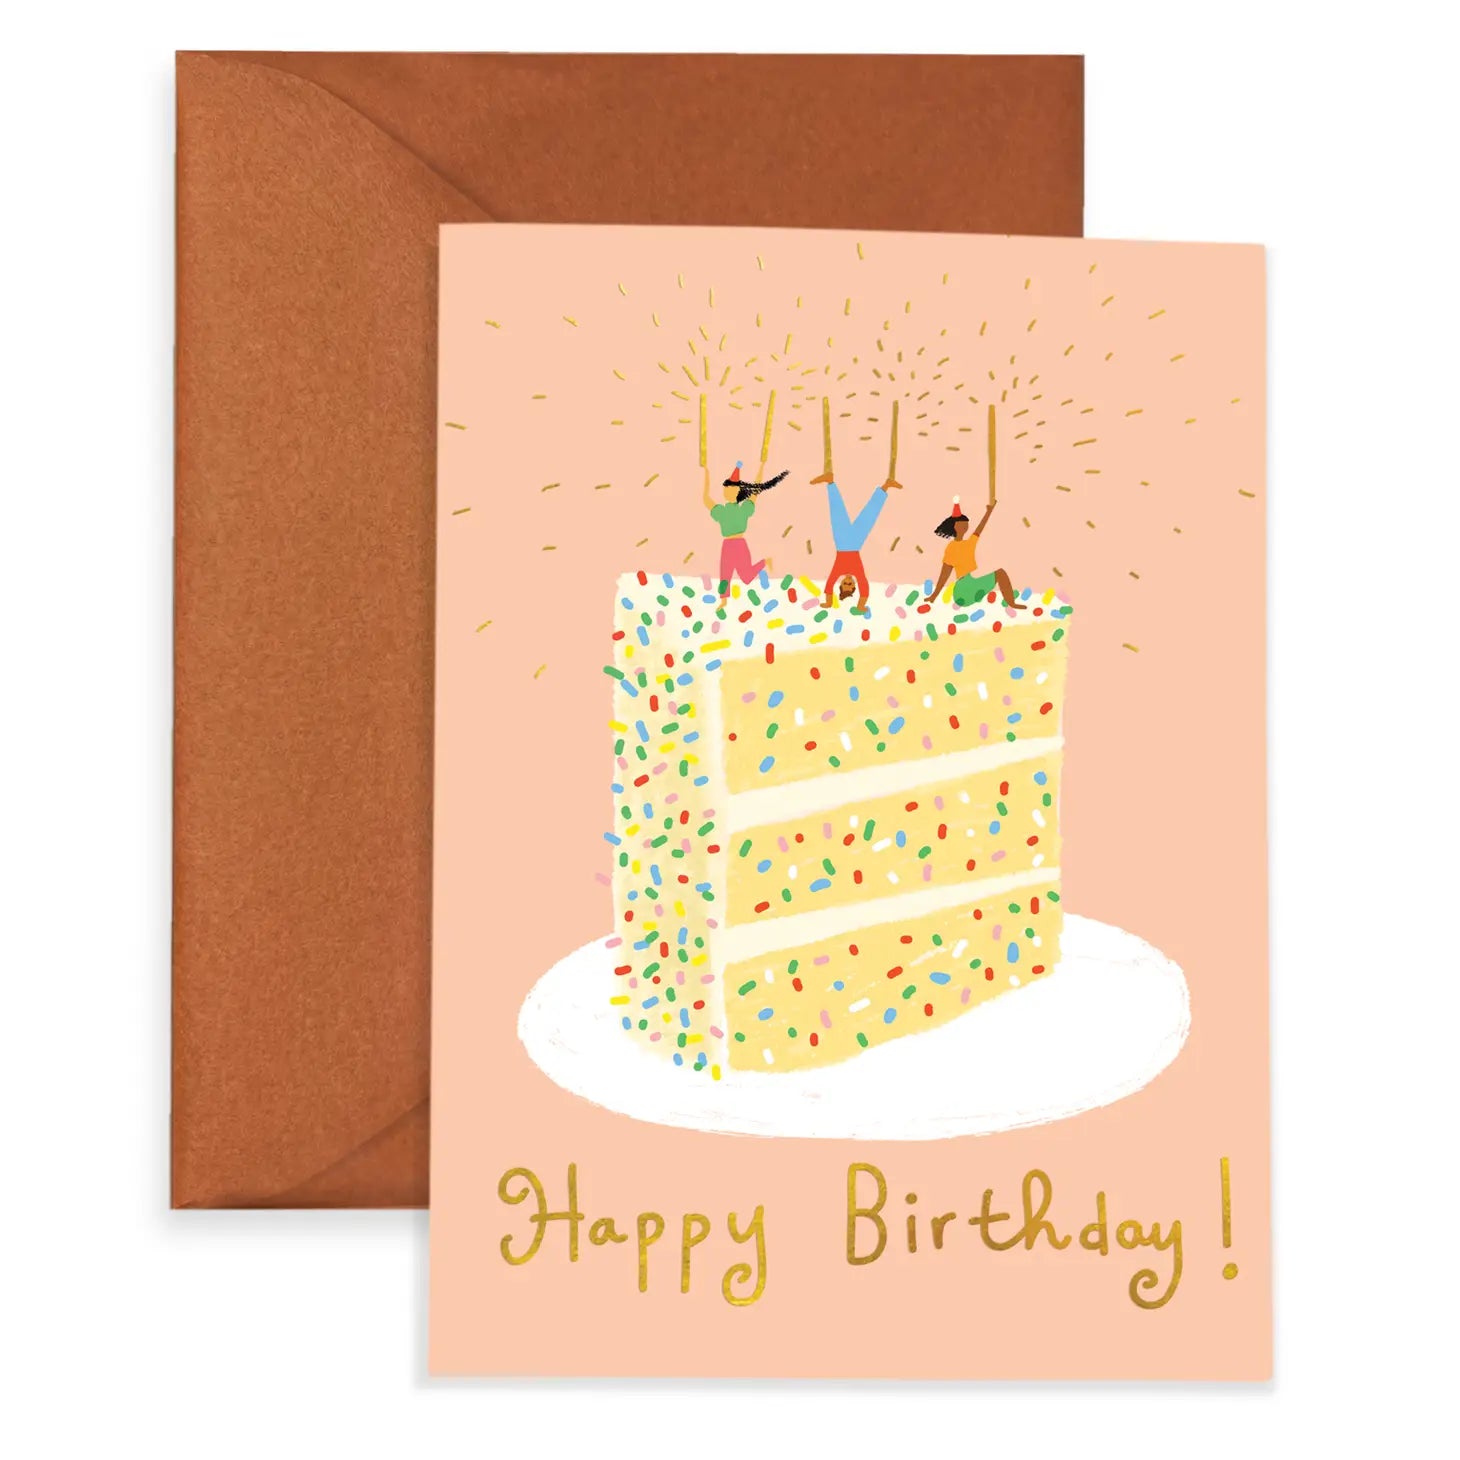 Pink greeting card that reads "Happy Birthday!" at the bottom. Main image is a slice of confetti cake with 3 people on top holding up 5 sparkling candles. 